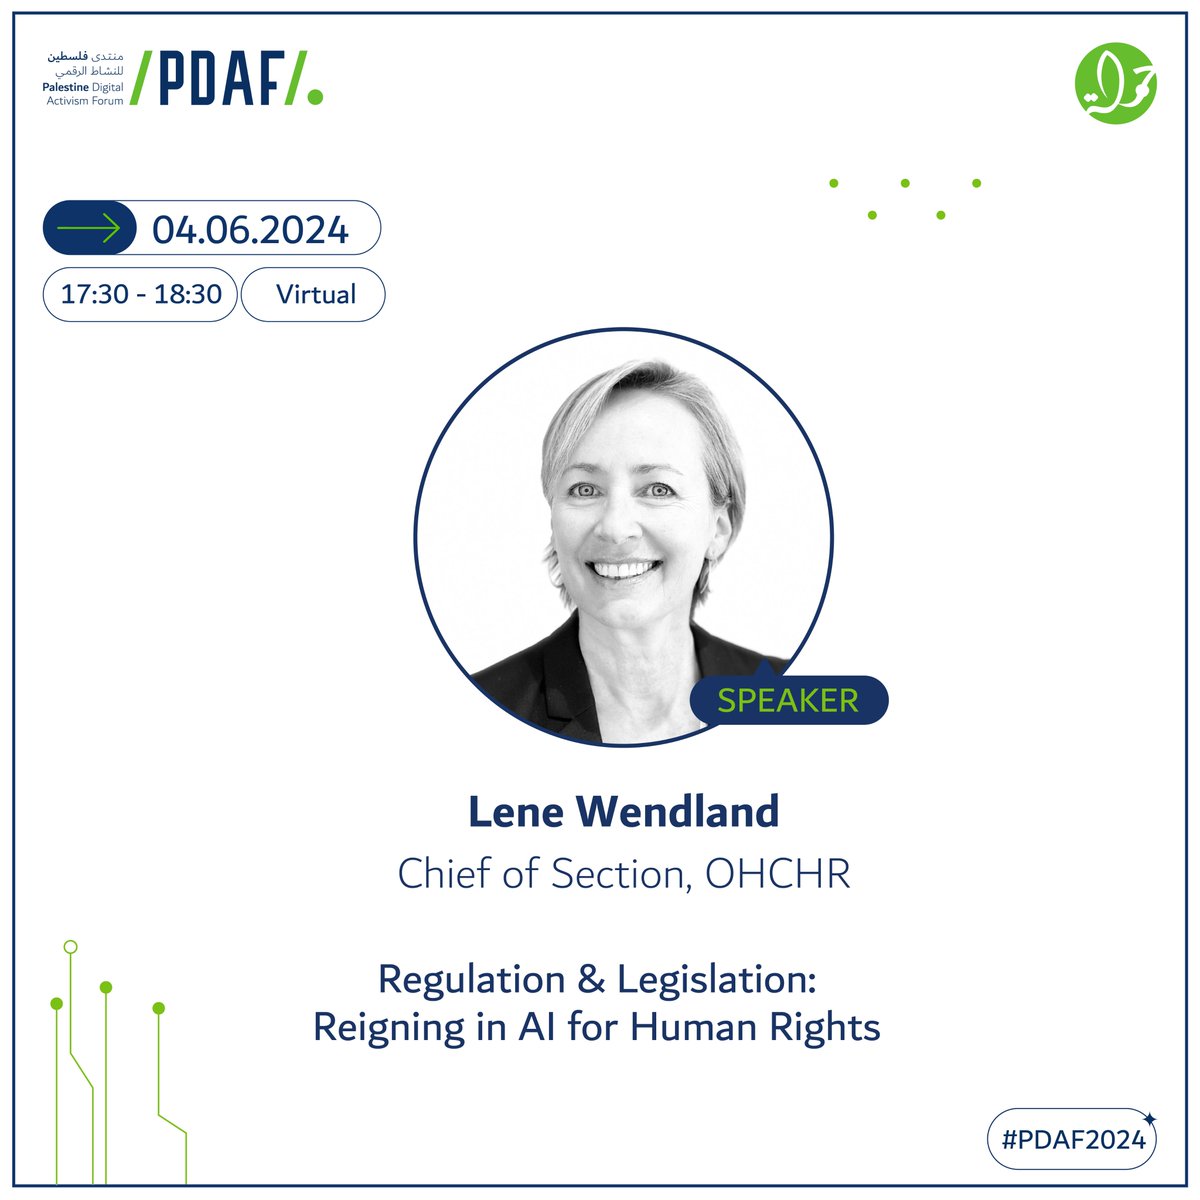 📢Join Lene Wendland, one of the speakers in the session: “Regulation & Legislation: Reigning in AI for Human Rights” Reserve your seat now: pdaf.net #PDAF2024